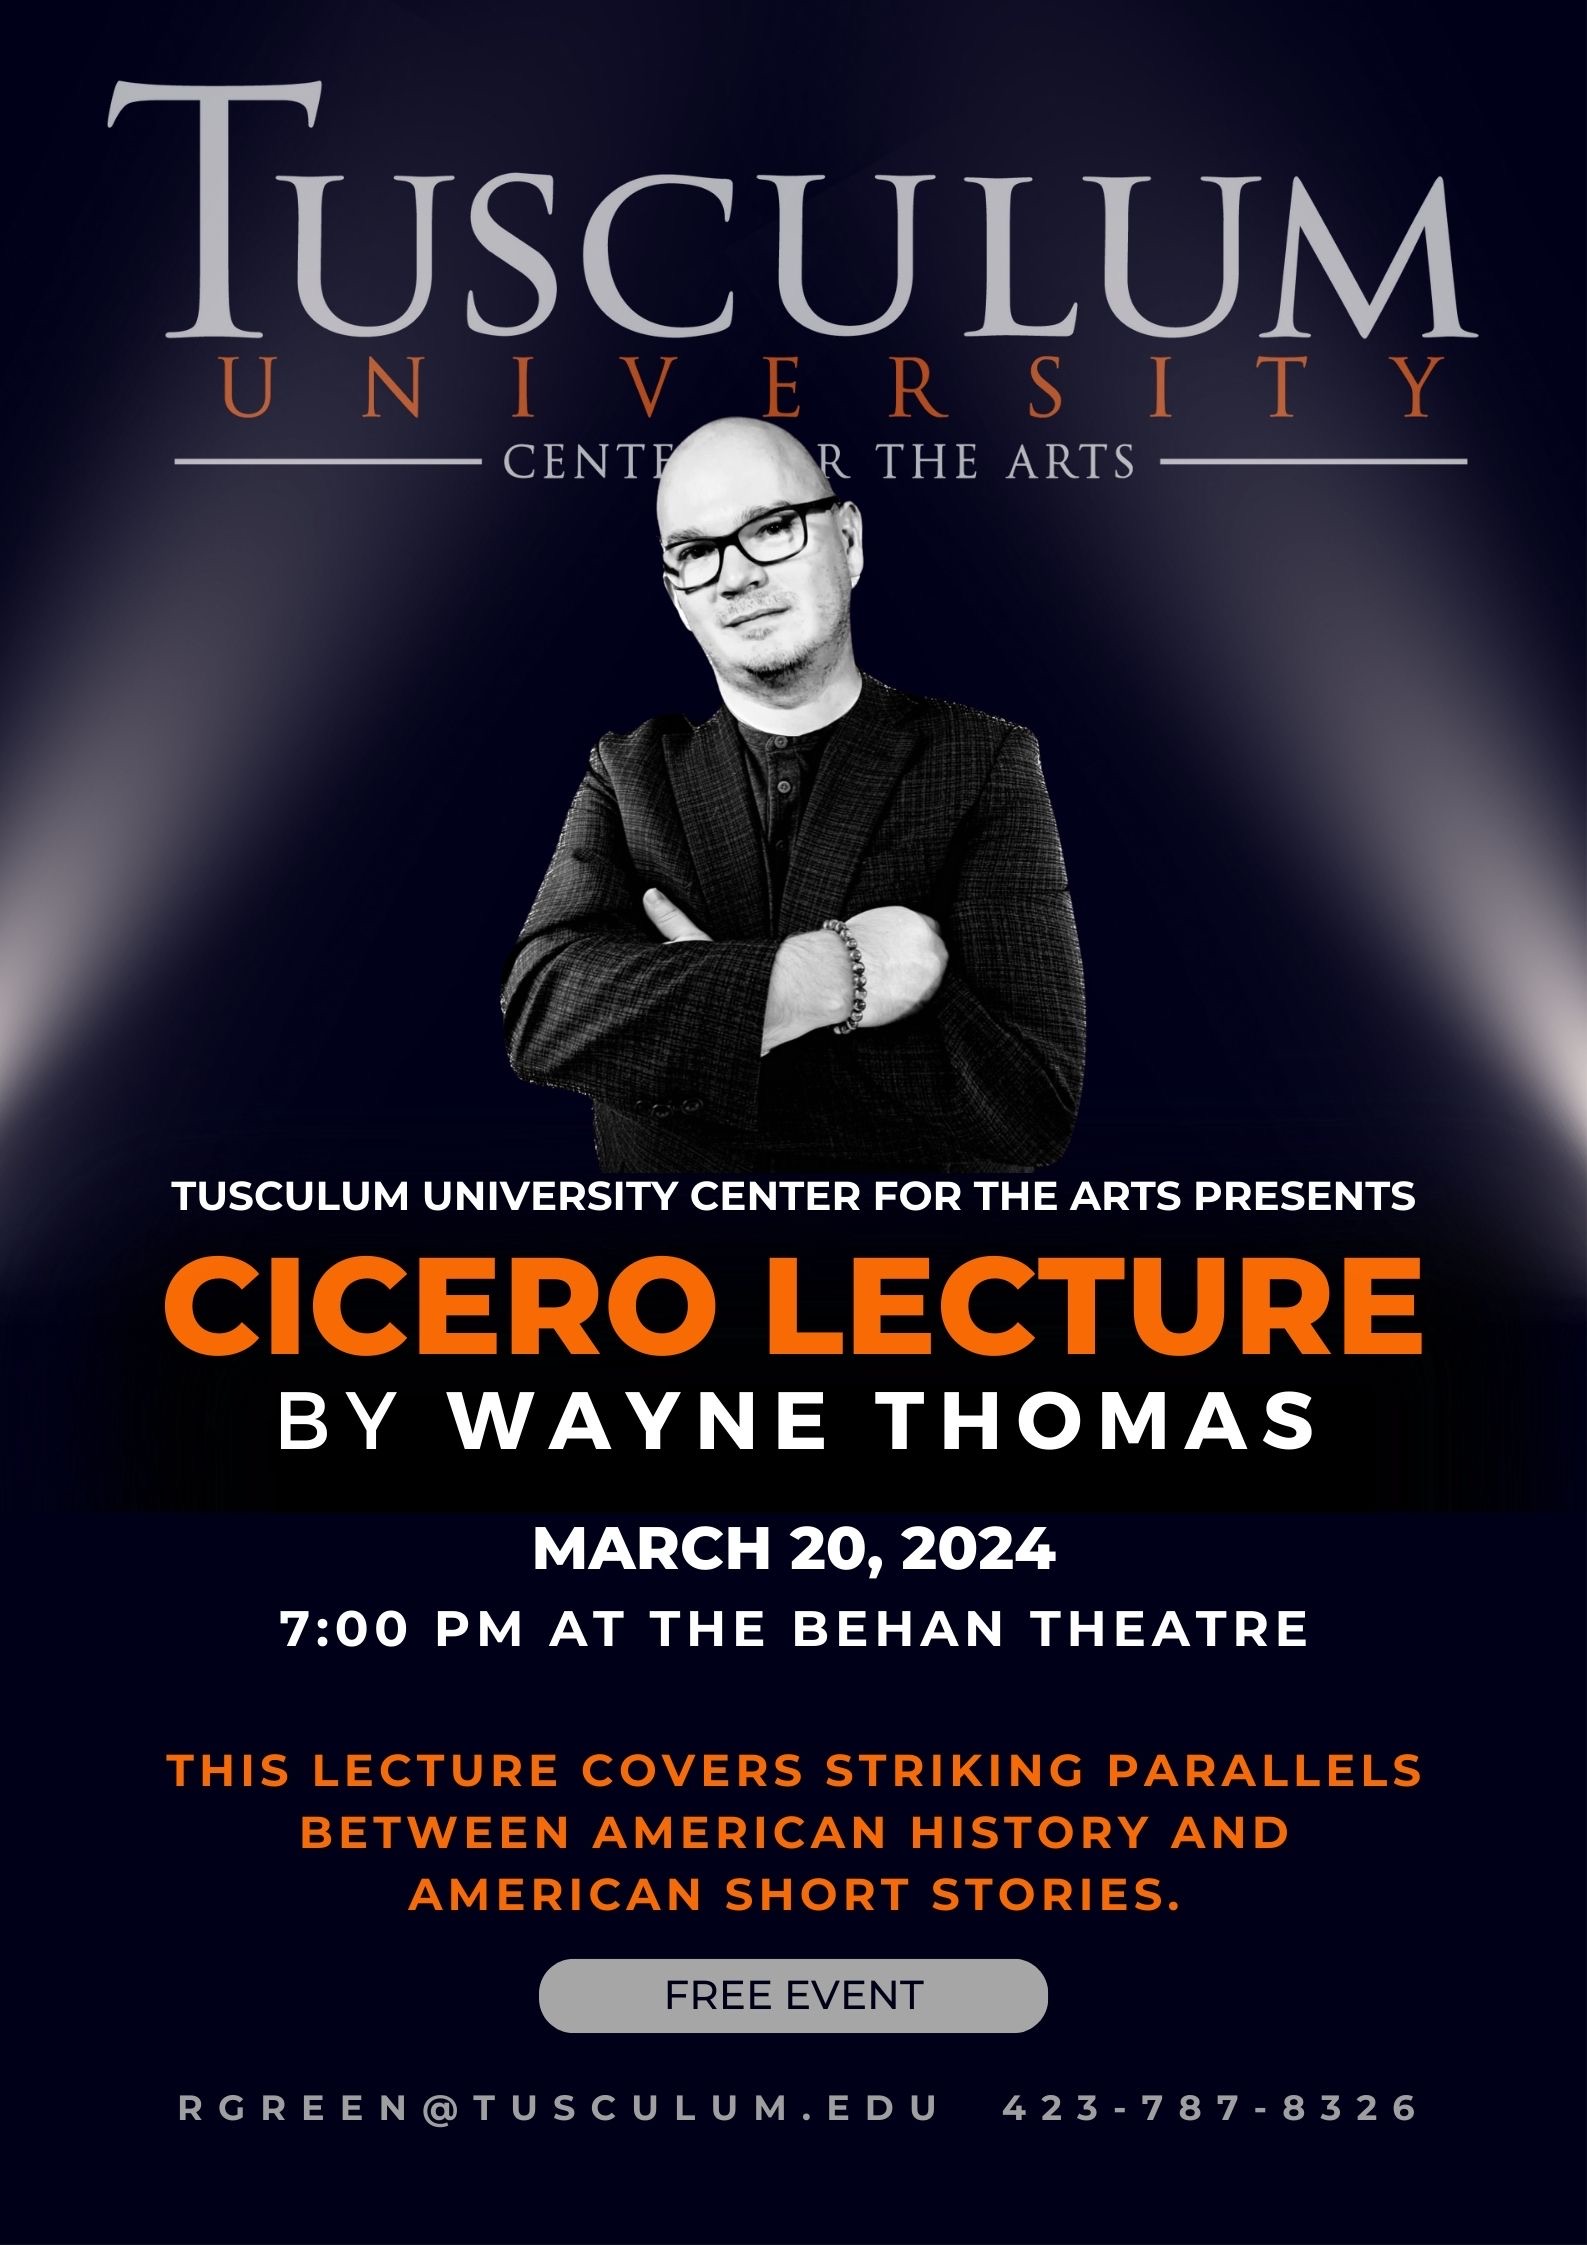 Cicero Lecture Poster